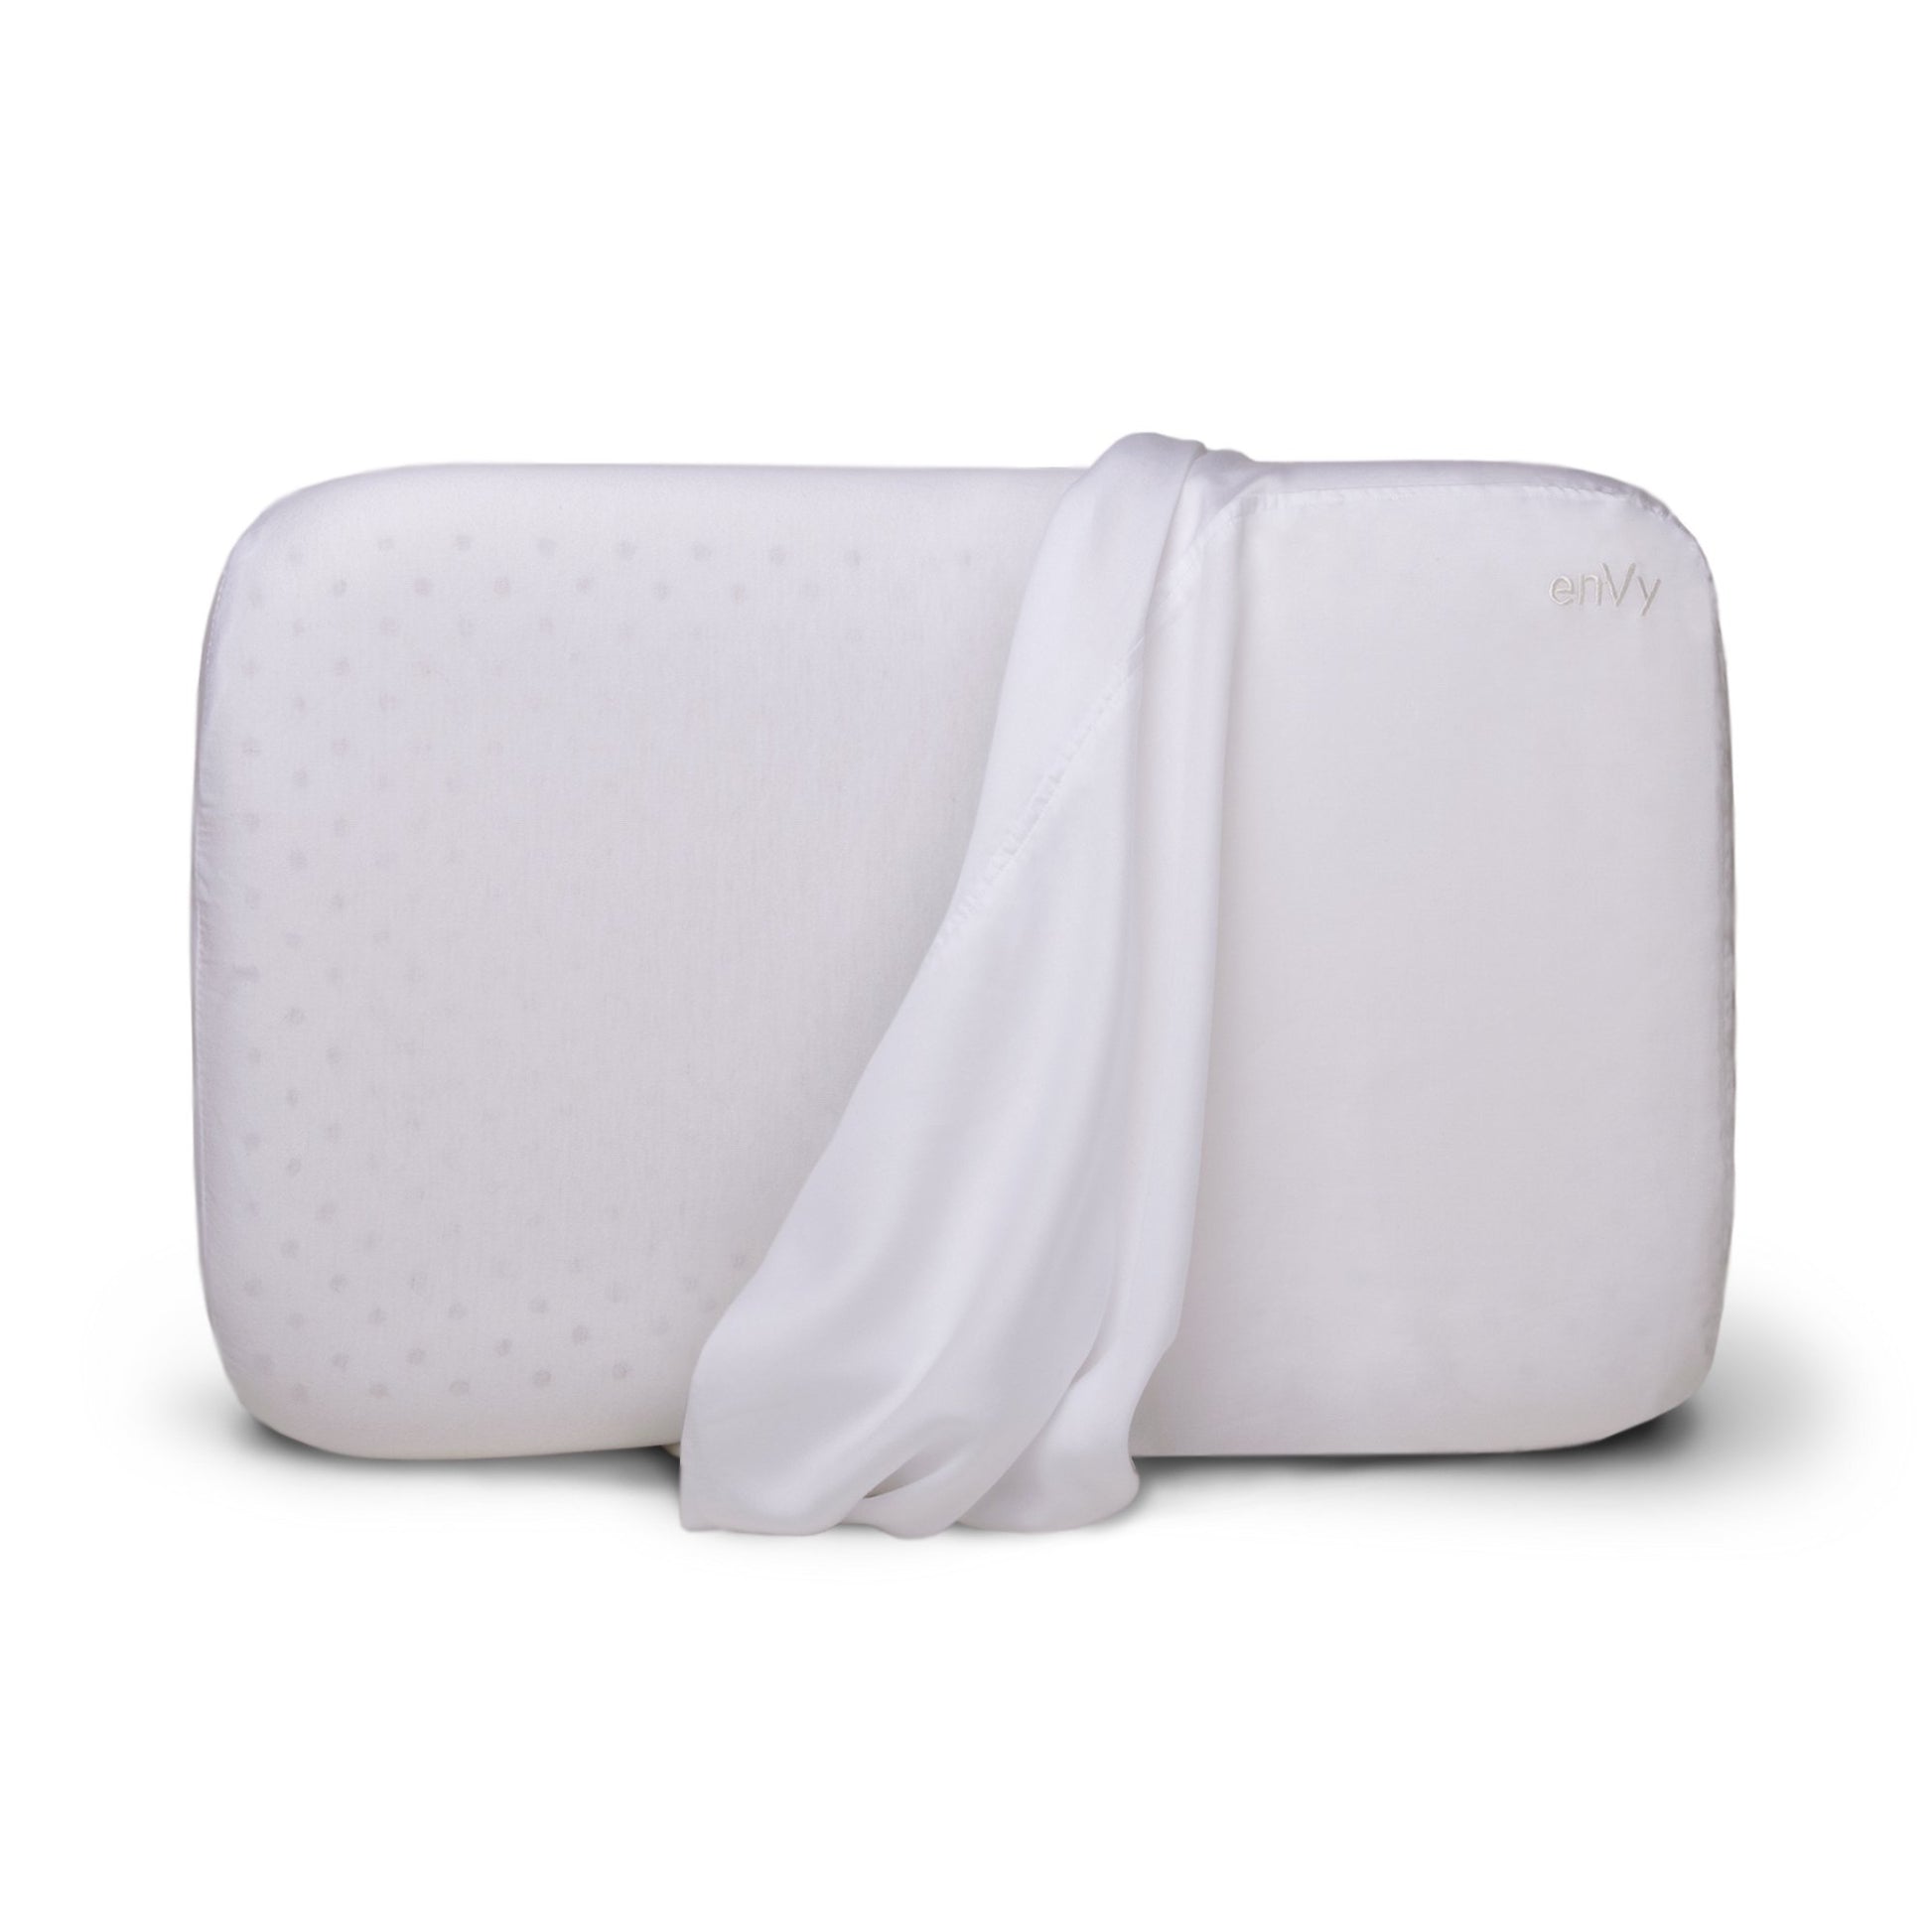 Natural Latex Anti-Aging Pillow with TENCEL™ by enVy® – enVy Pillow